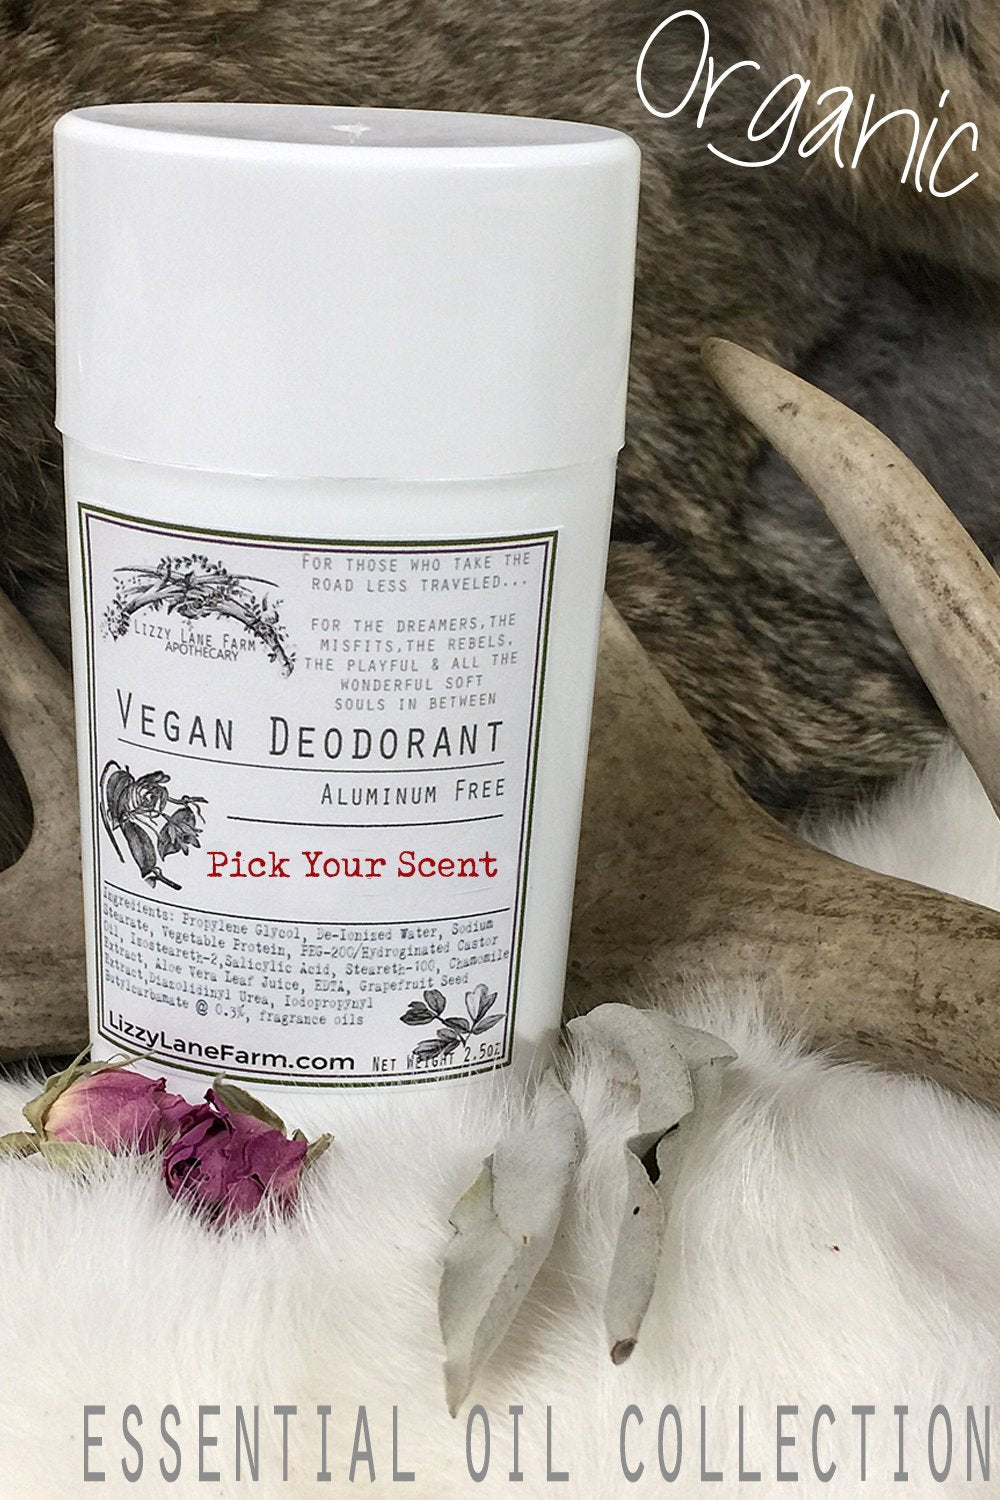 Natural Deodorant: essential oil blends :: PICK • A • SCENT - Lizzy Lane Farm Apothecary